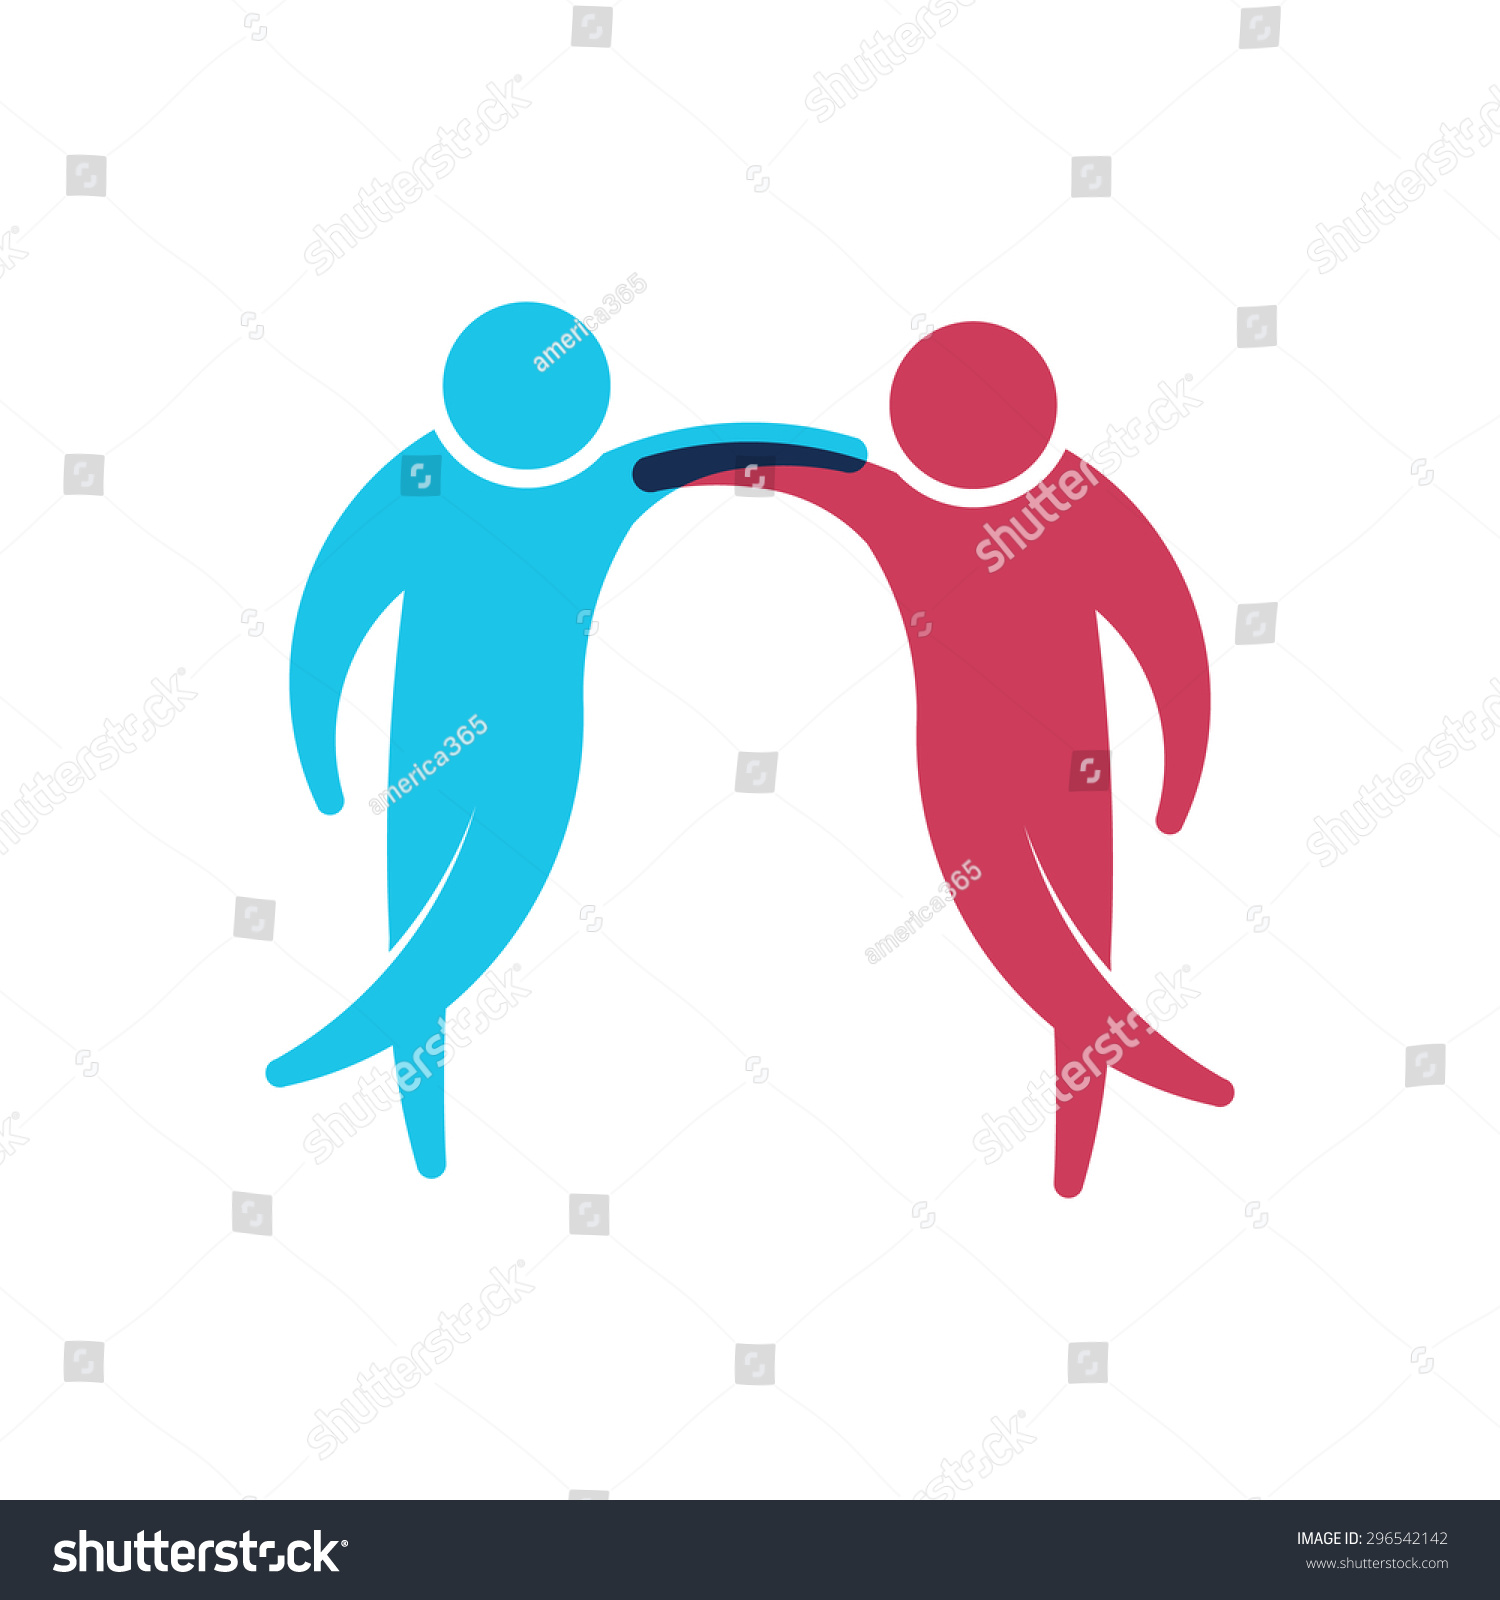 People Logo Group Two Friends Stock Illustration 296542142